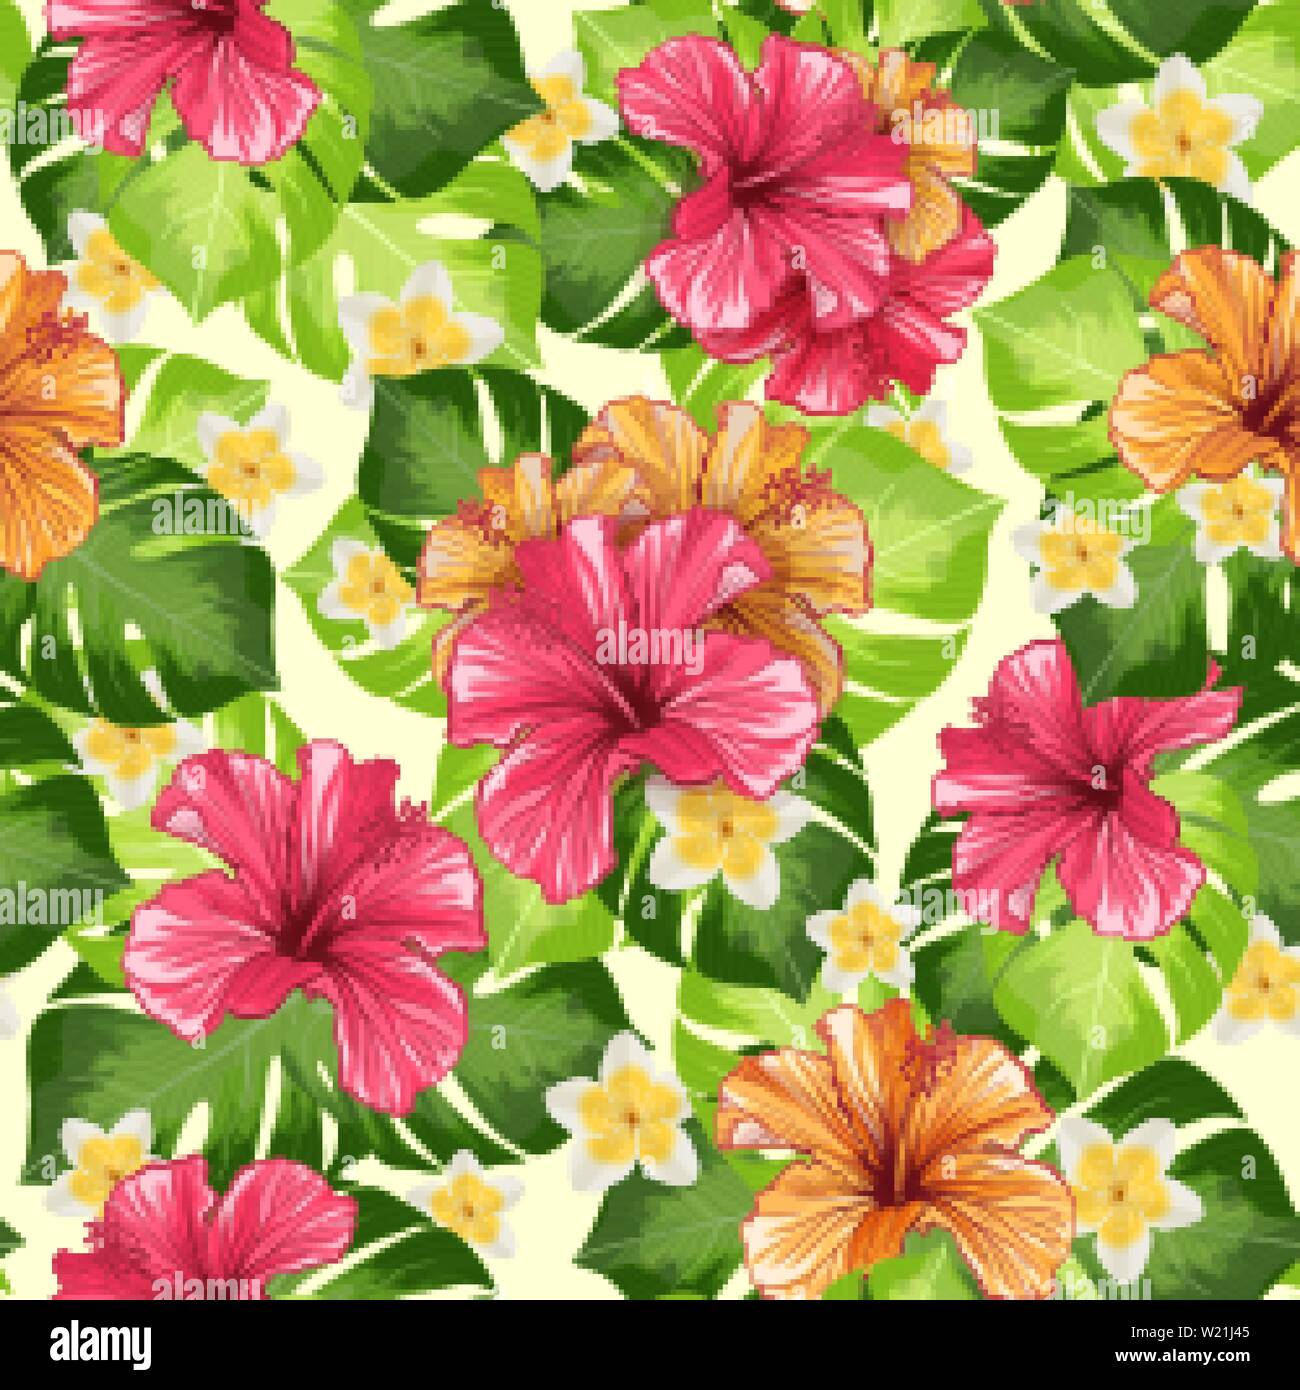 Rose chinese Stock Vector Images - Page 2 - Alamy